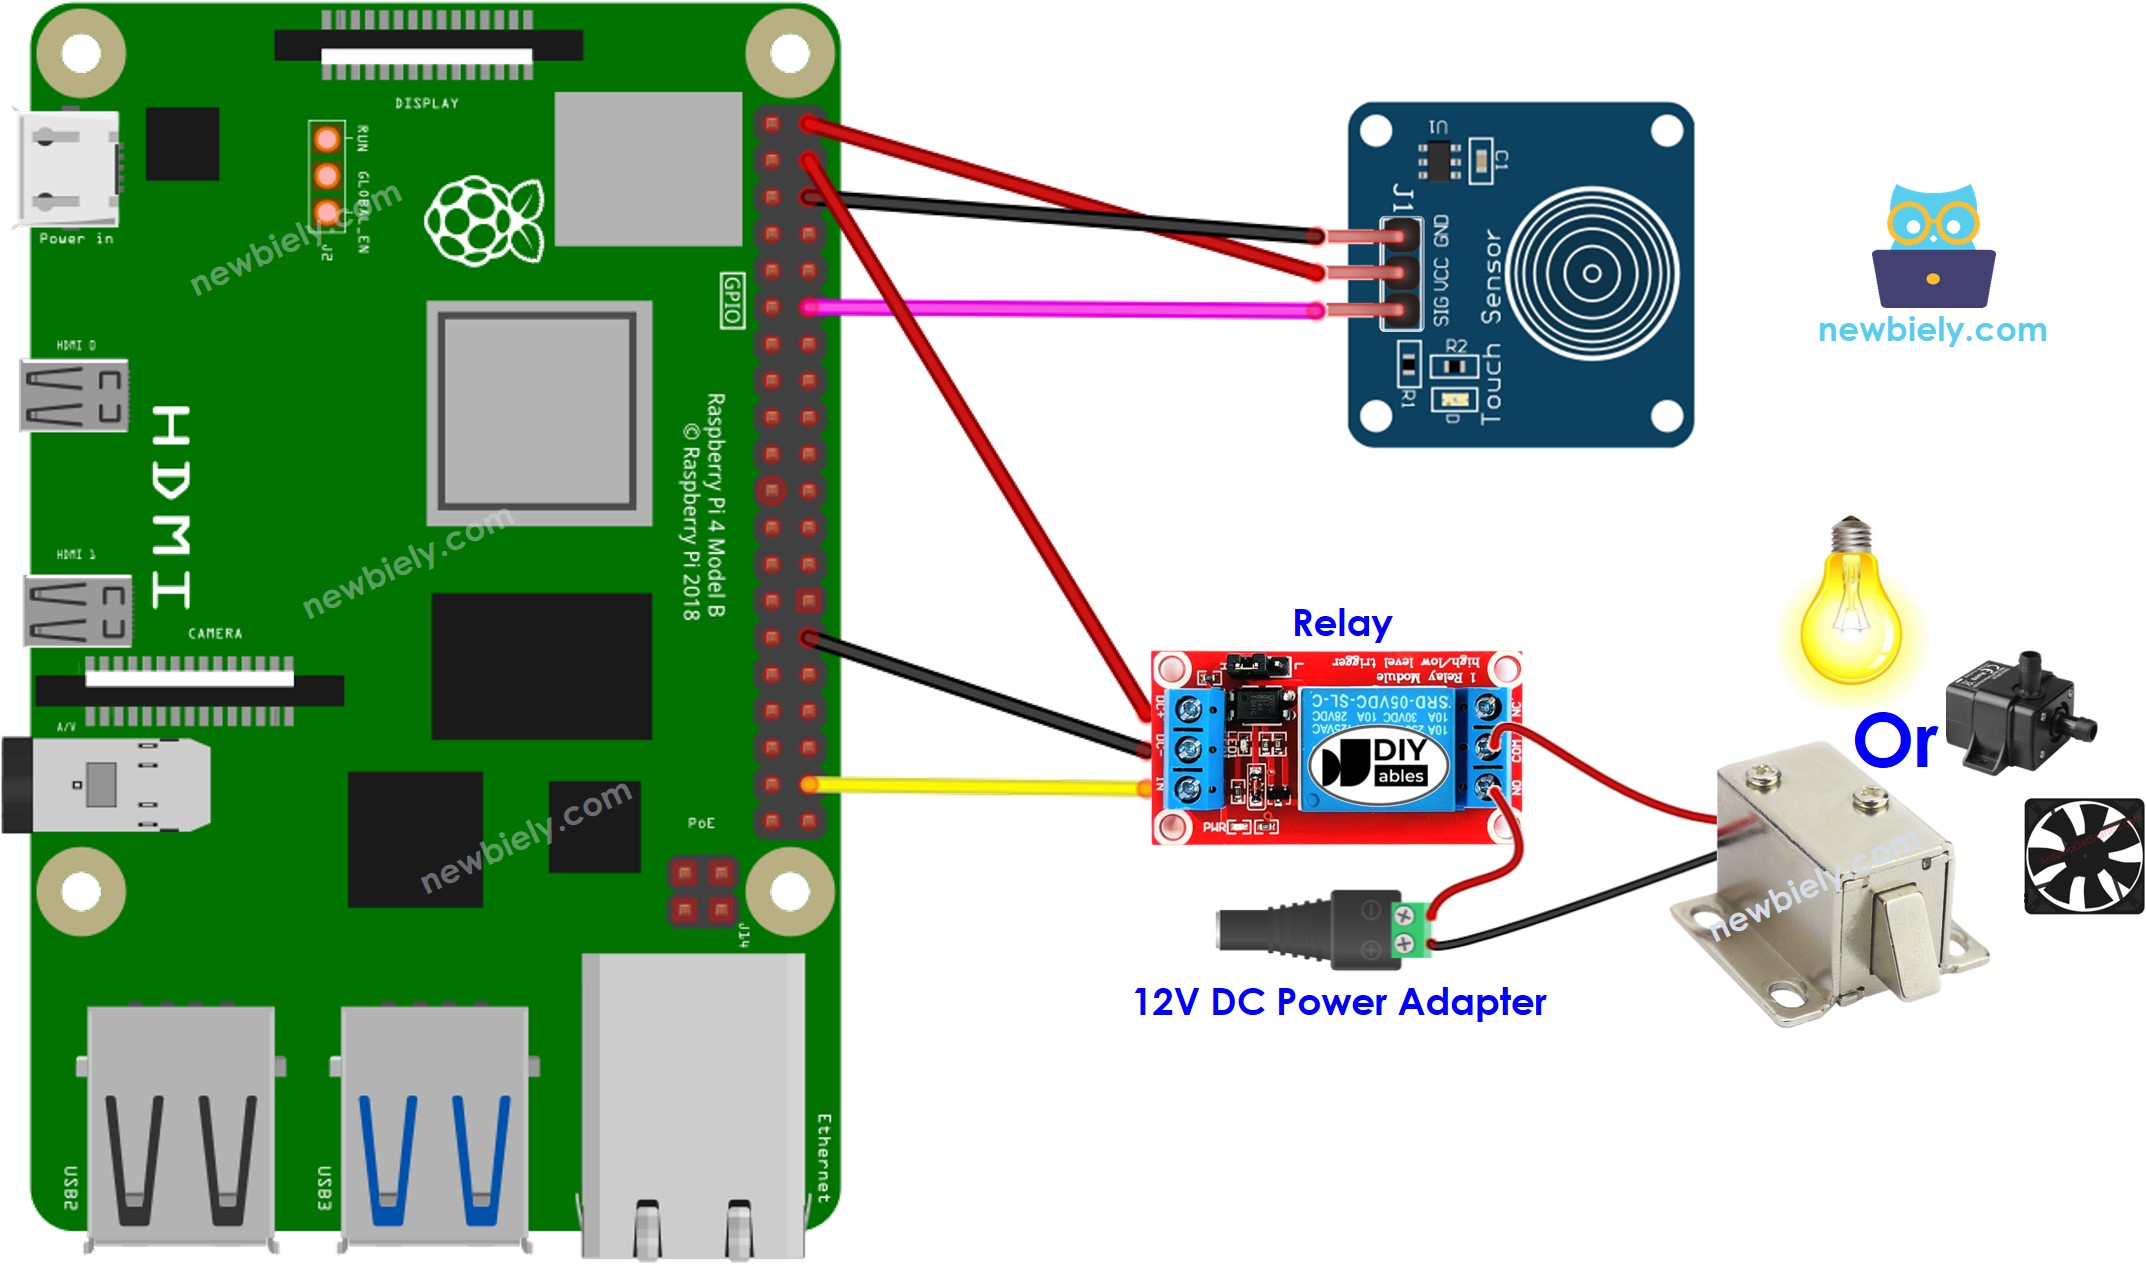 The wiring diagram between Raspberry Pi and Touch Sensor relay